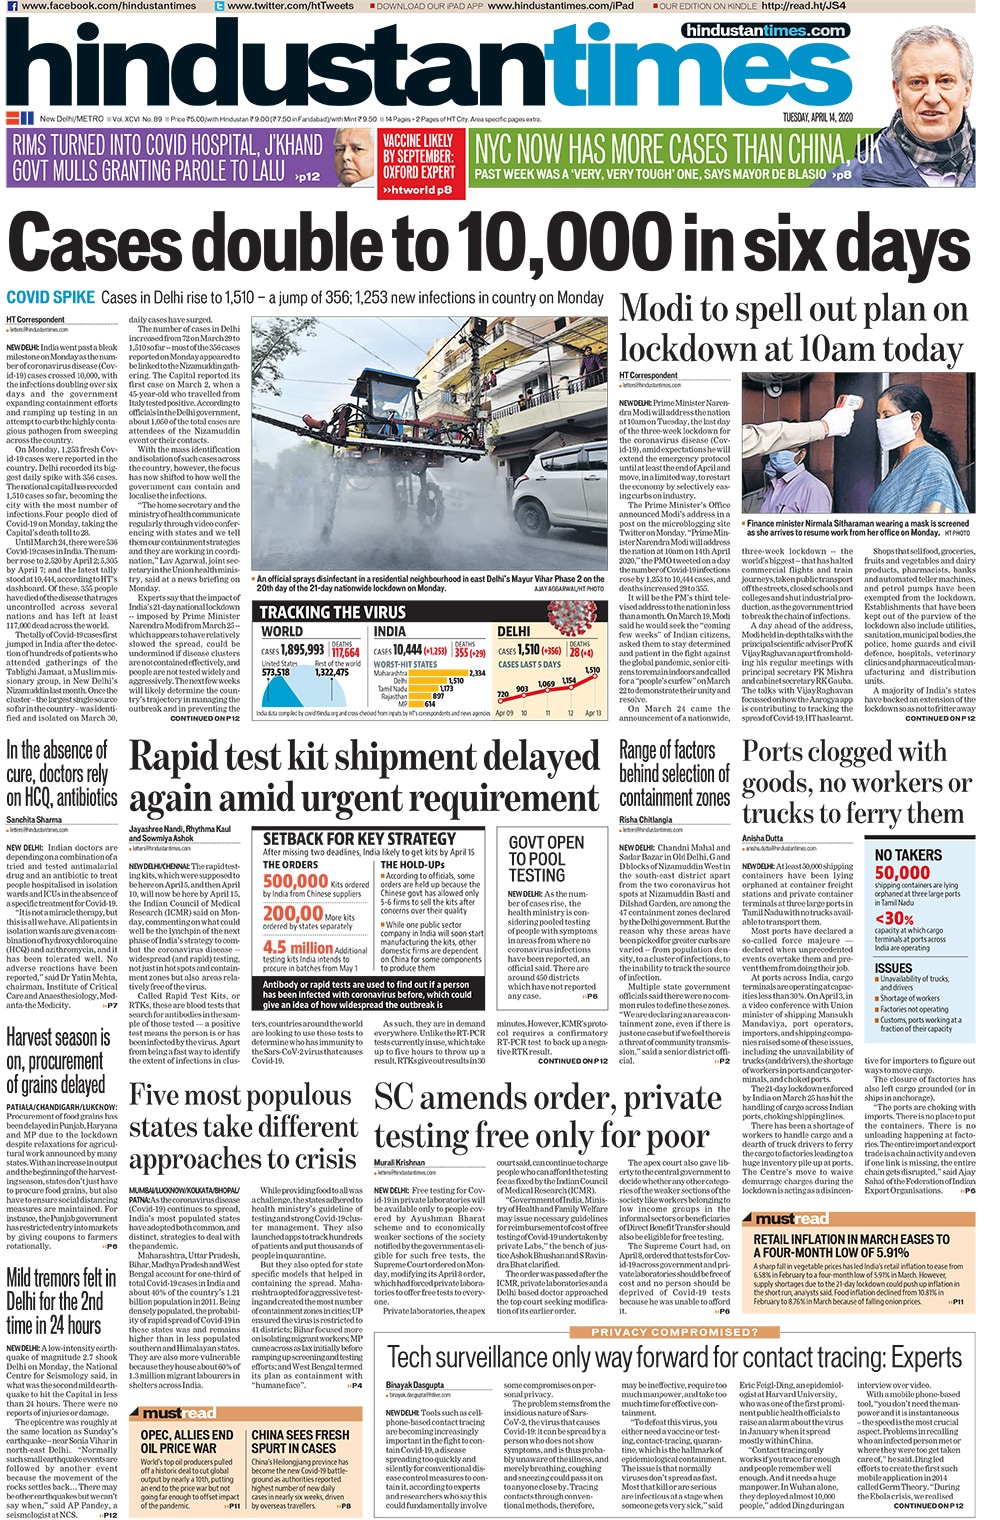 Newspaper Headlines: PM Modi To Address Nation Today At 10 am & Other Top Stories